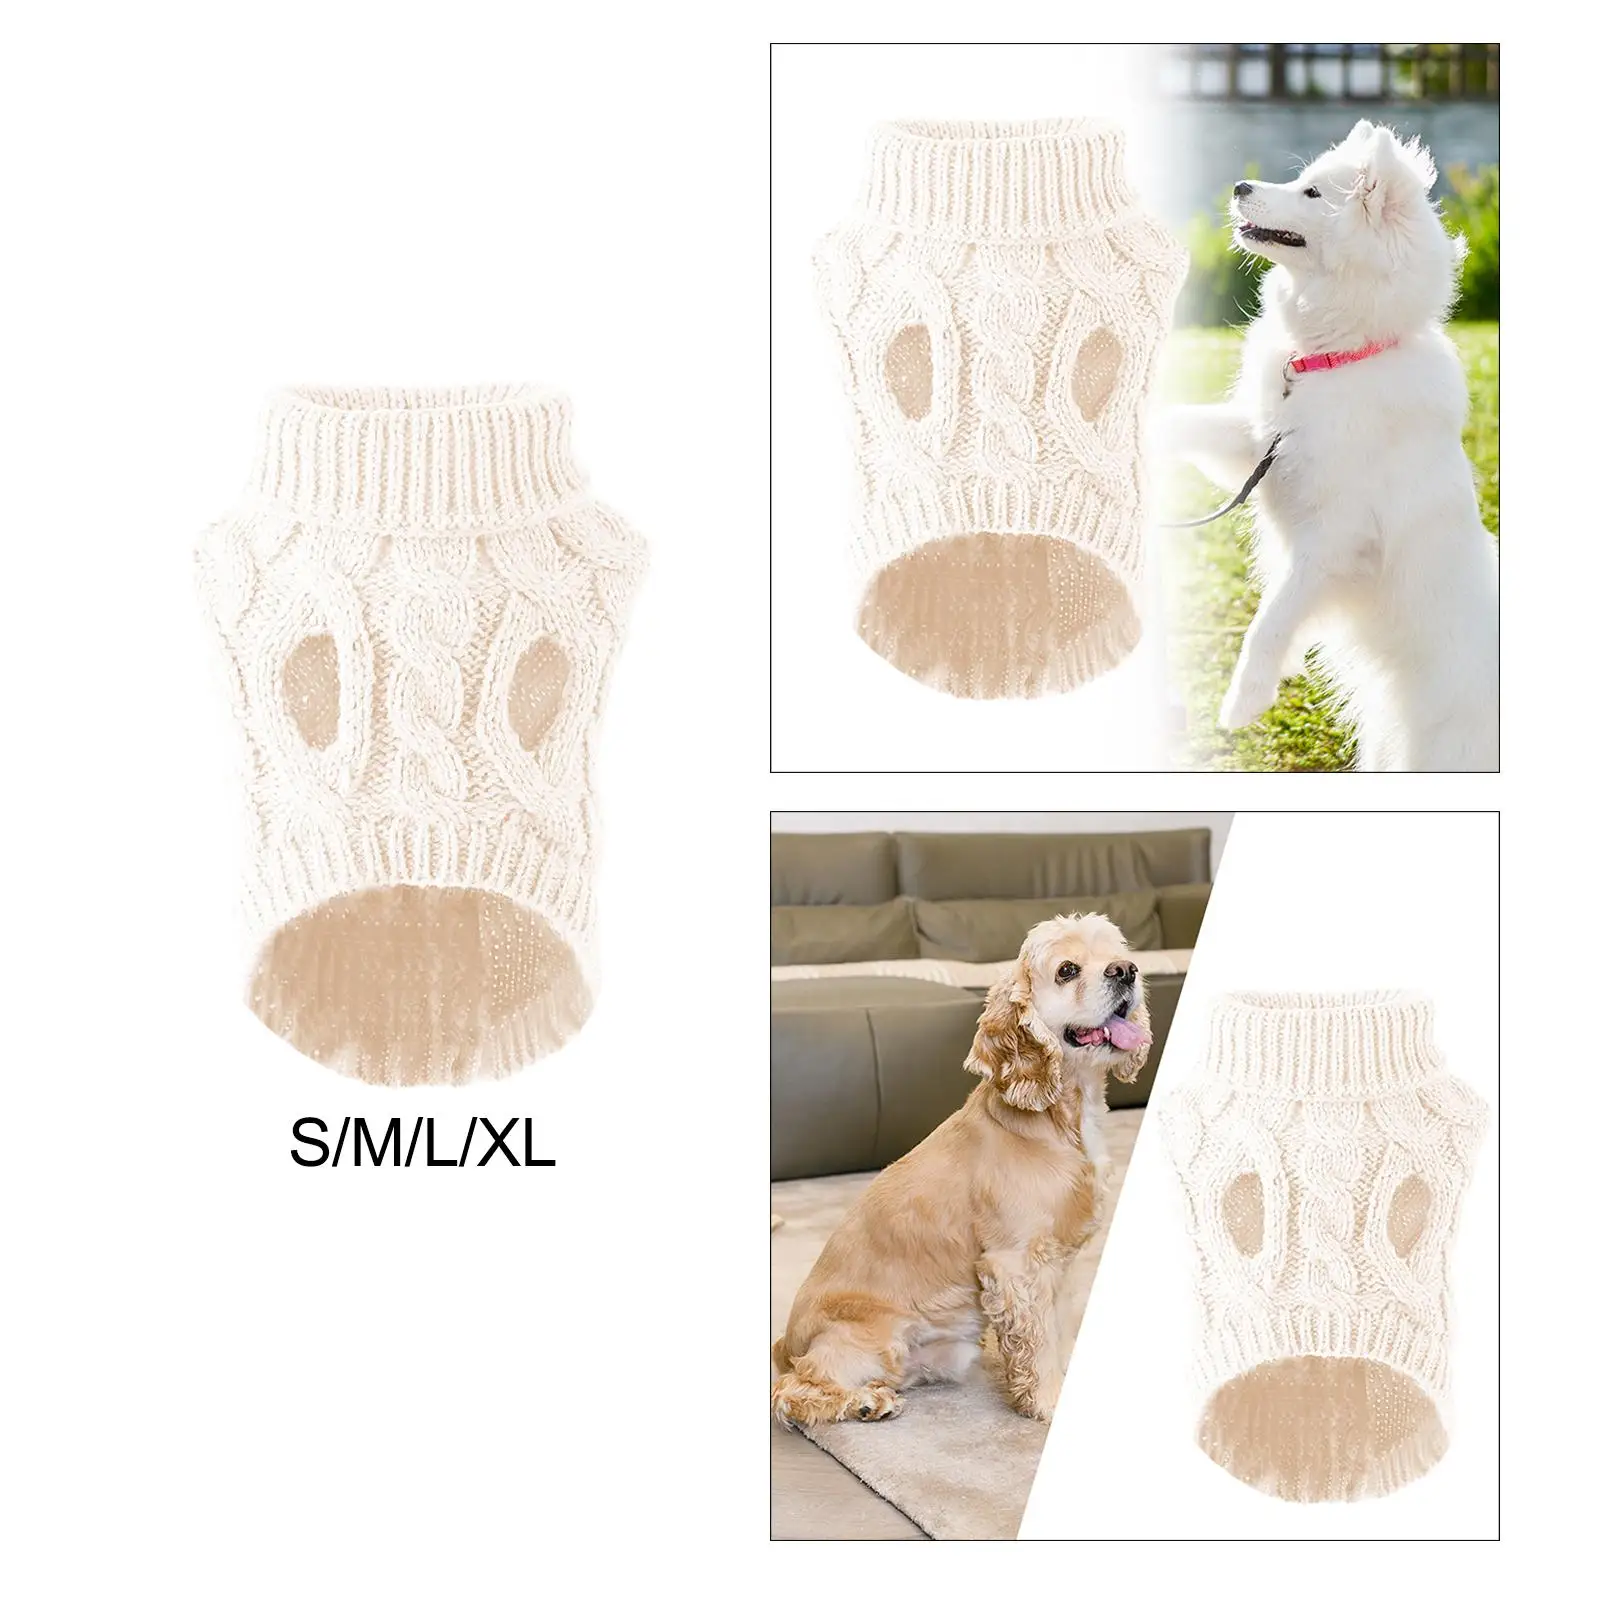 Knitted Dog Sweater Soft Holiday Dressing Comfortable Jogging Training Pet Sweater Knit Puppy Sweater for Small Medium Dogs Cats